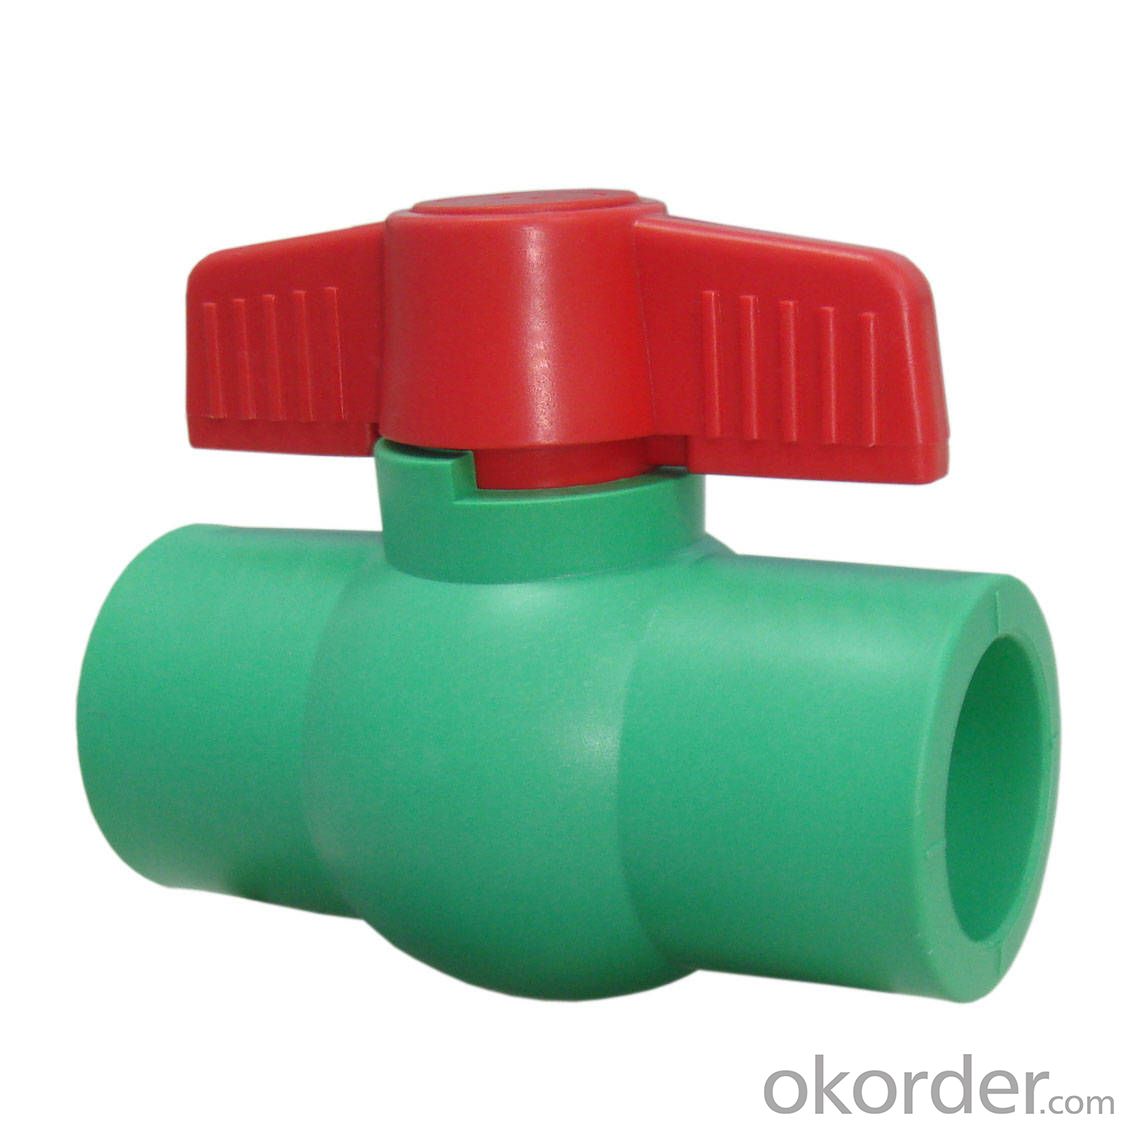 PPR Ball Valve Fittings of Industrial Application Made in China Factory